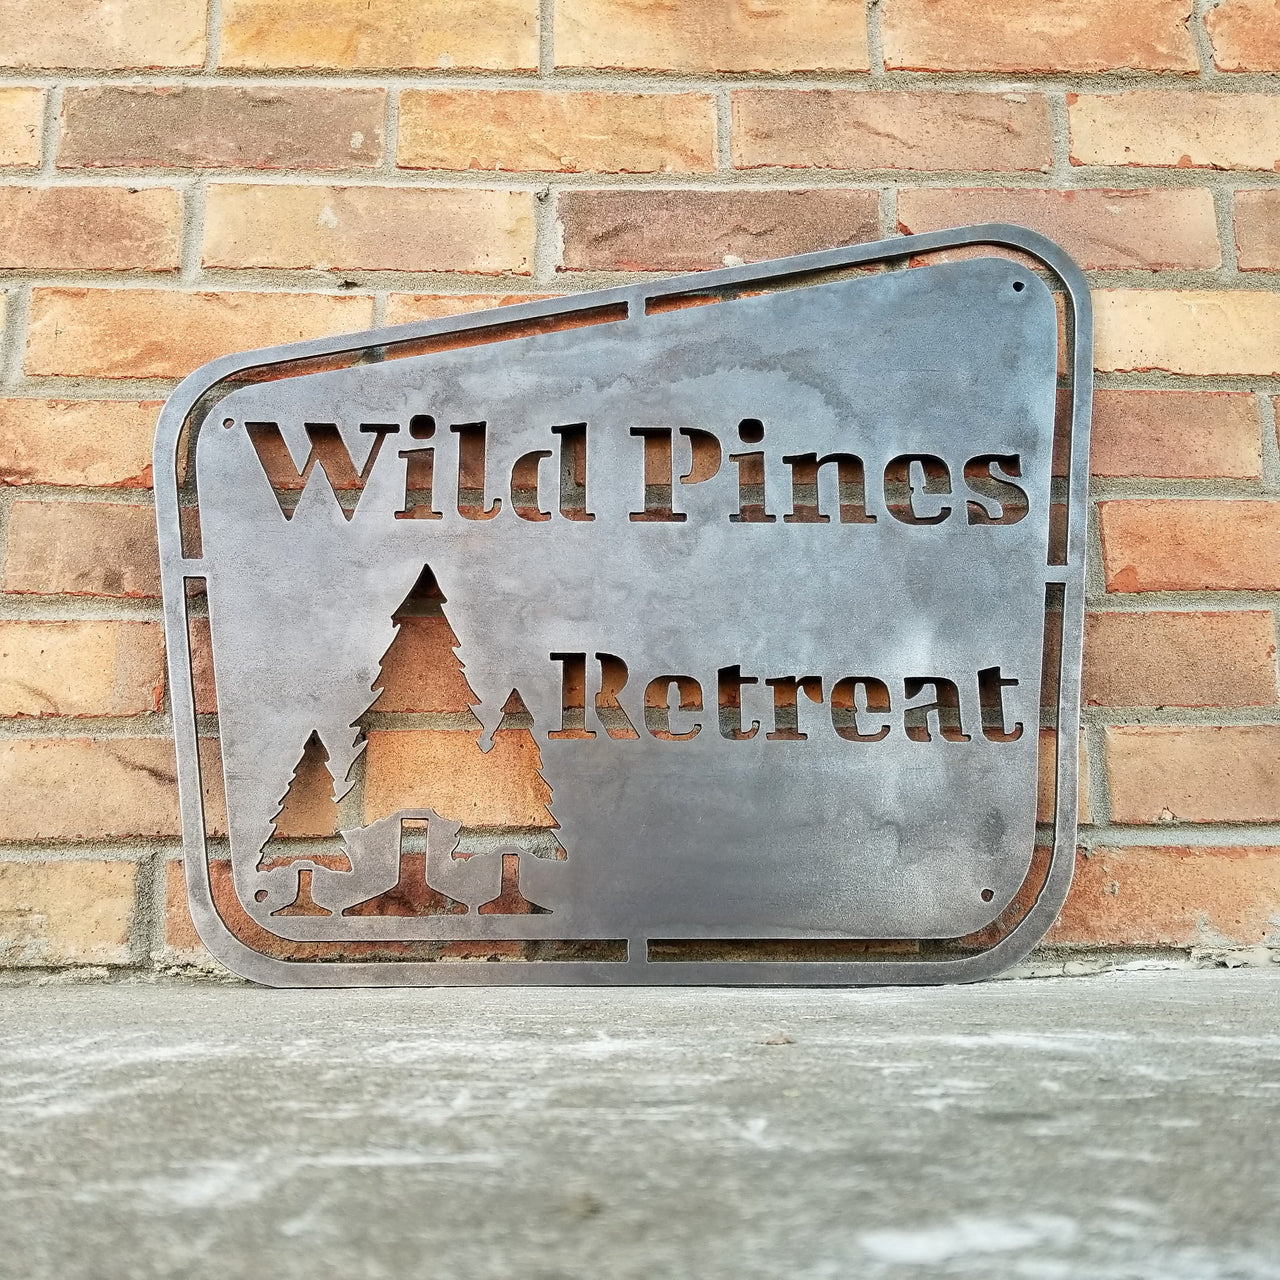 This sign has a vintage design and depicts a group of trees. It reads, "Wild Pines Retreat".